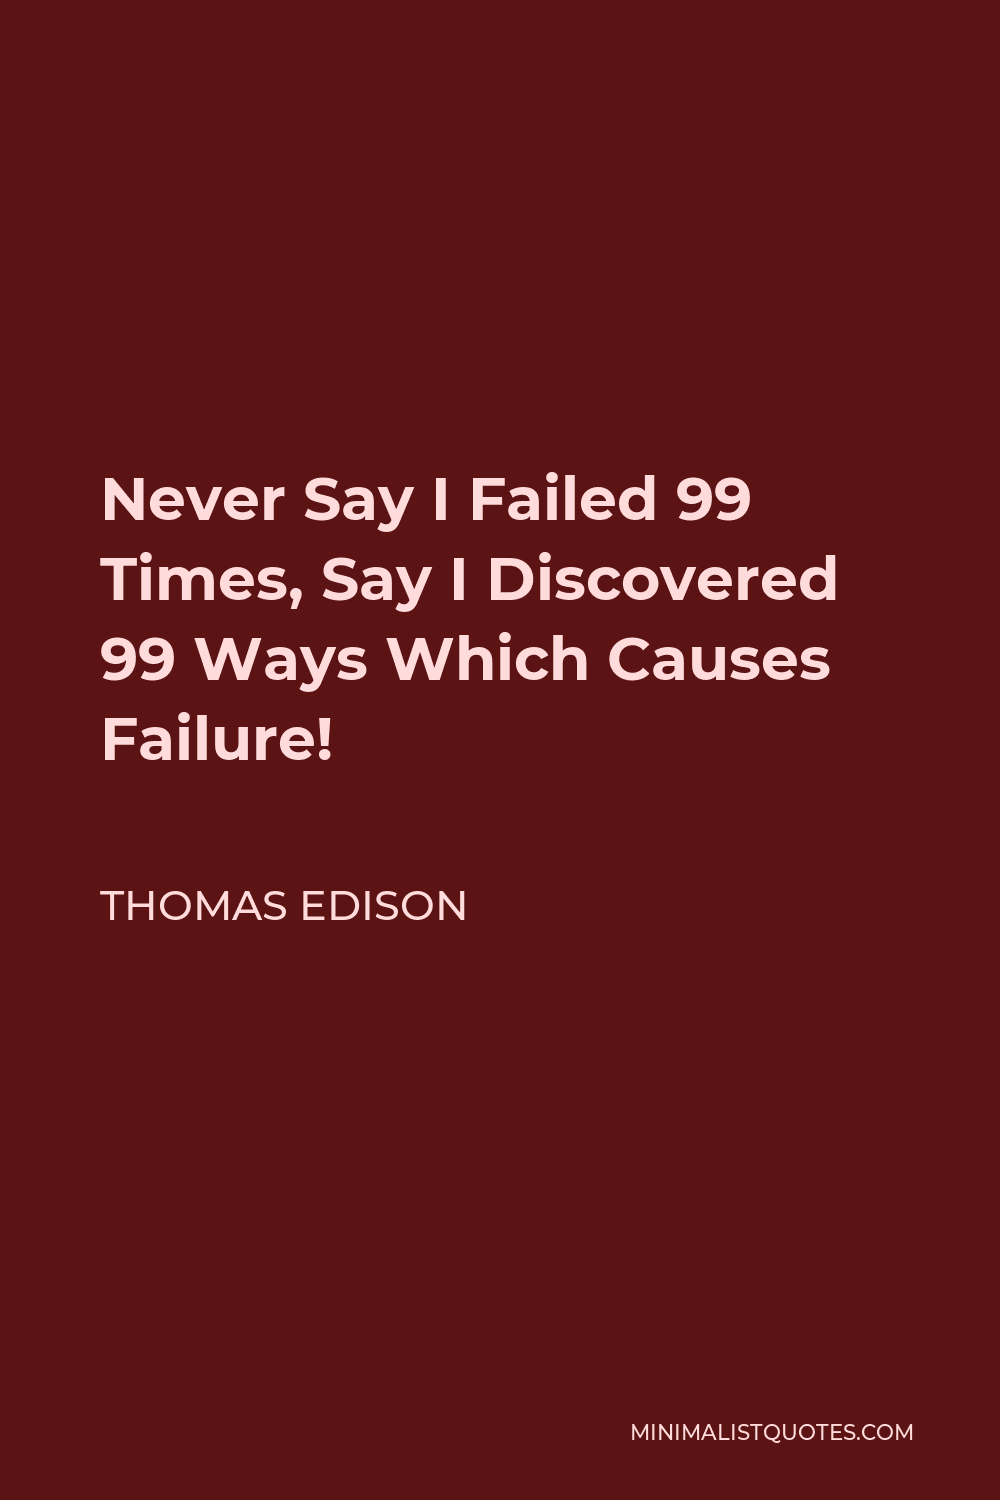 Thomas Edison Quote - Never Say I Failed 99 Times, Say I Discovered 99 Ways Which Causes Failure!